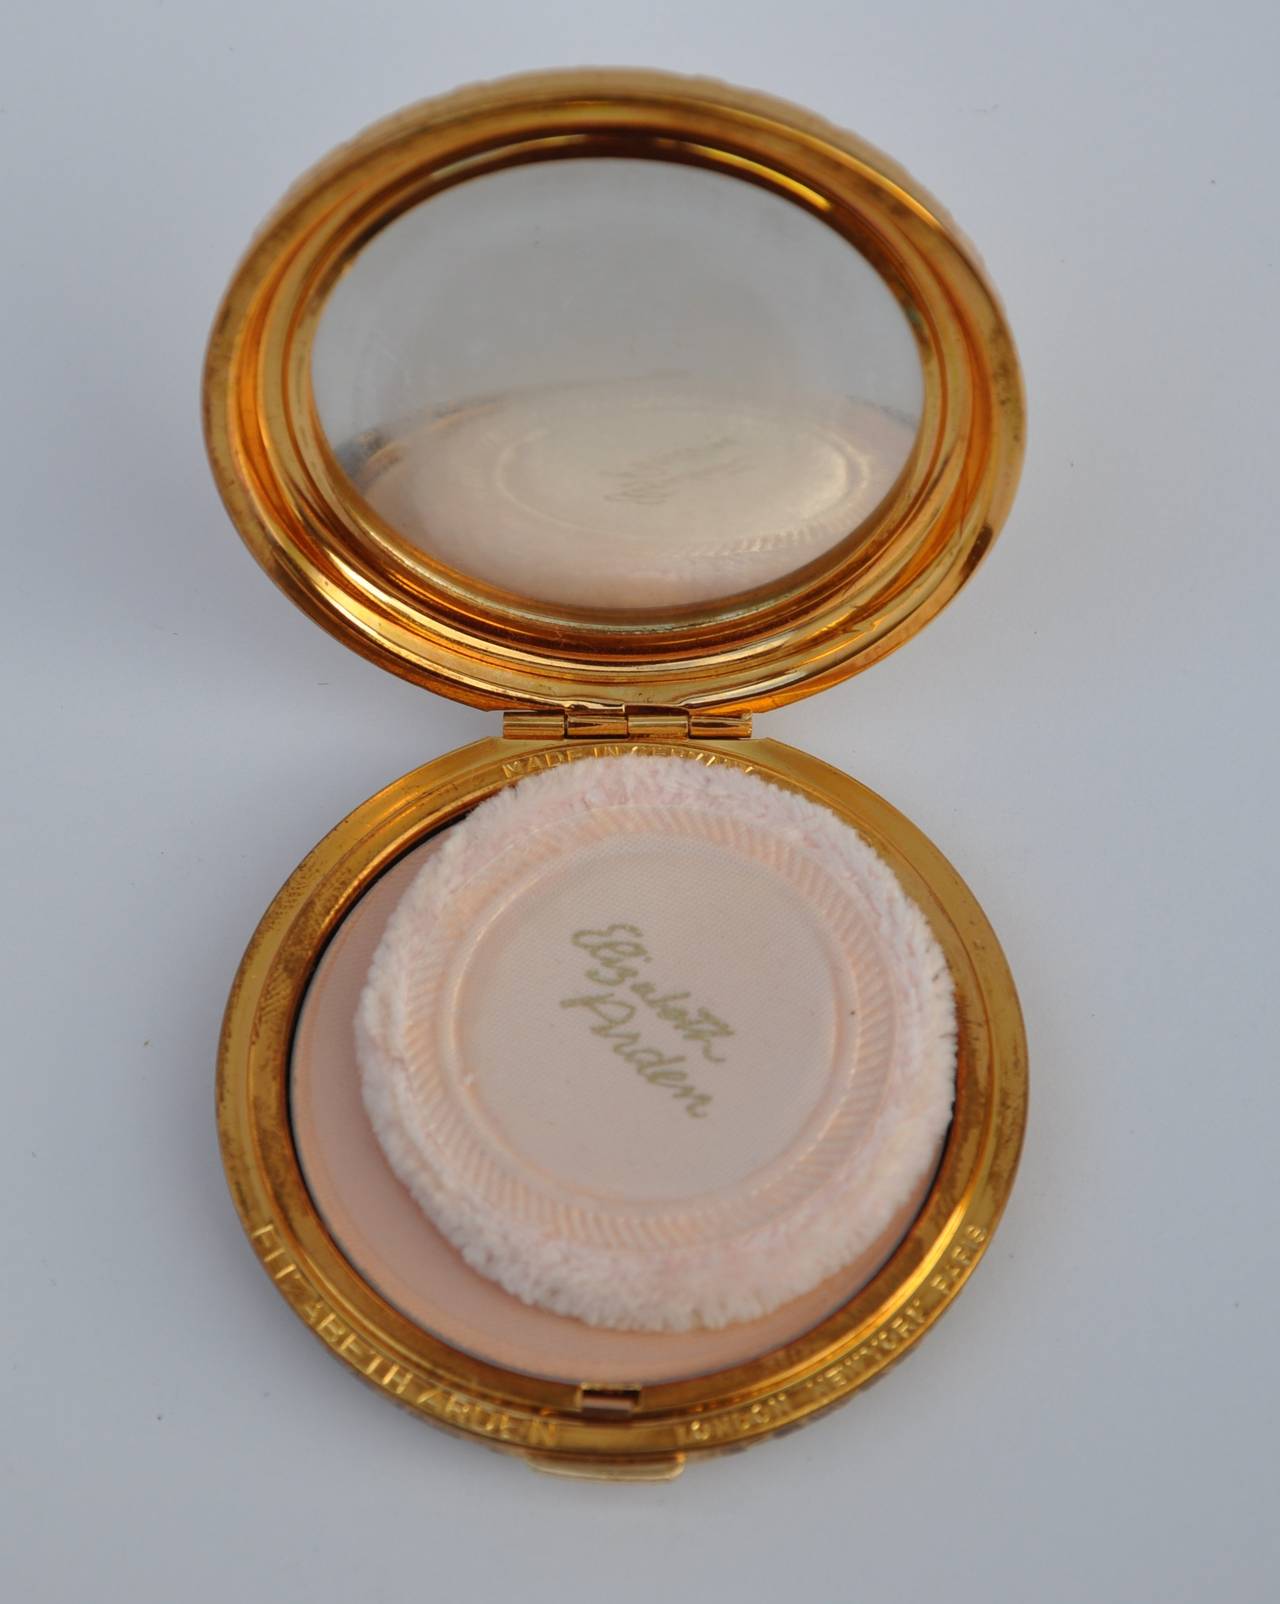 Elizabeth Arden gilded gold hardware made in Germany is accented with a 